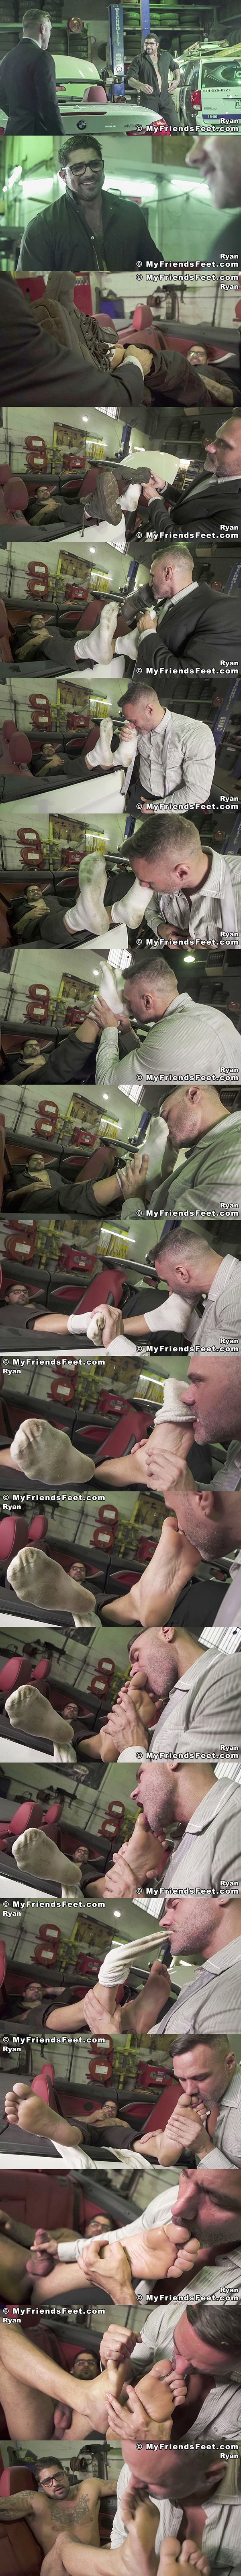 Masculine Canadian beefcake, mechanic Ryan Bones gets his sweaty socks and manly bare feet worshiped by Manuel Skye until Ryan blows his load at Myfriendsfeet 01